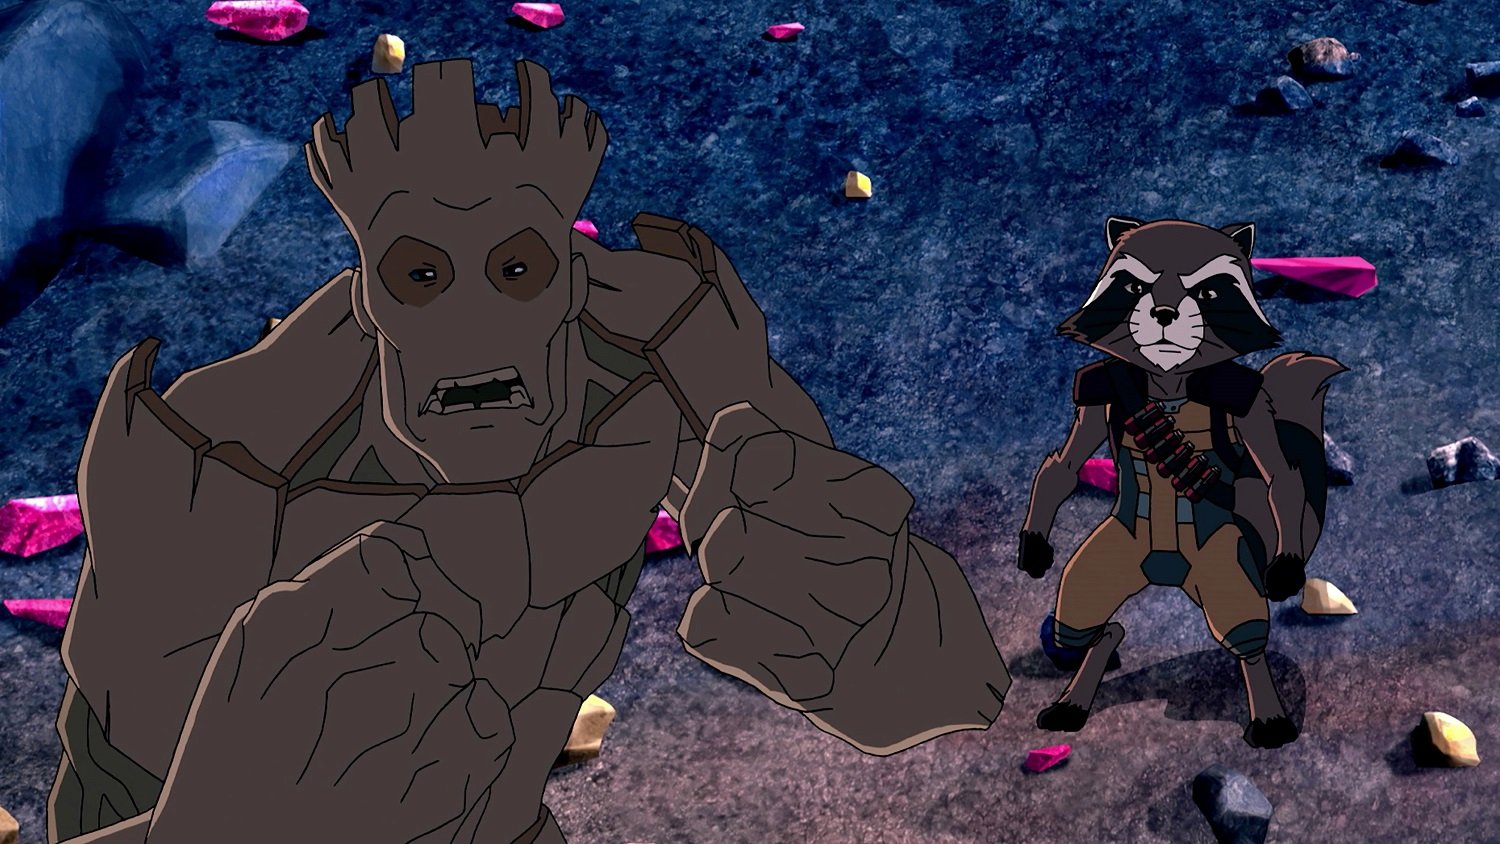 Groot and Rocket Raccoon in Marvel's Guardians of the Galaxy on Disney XD